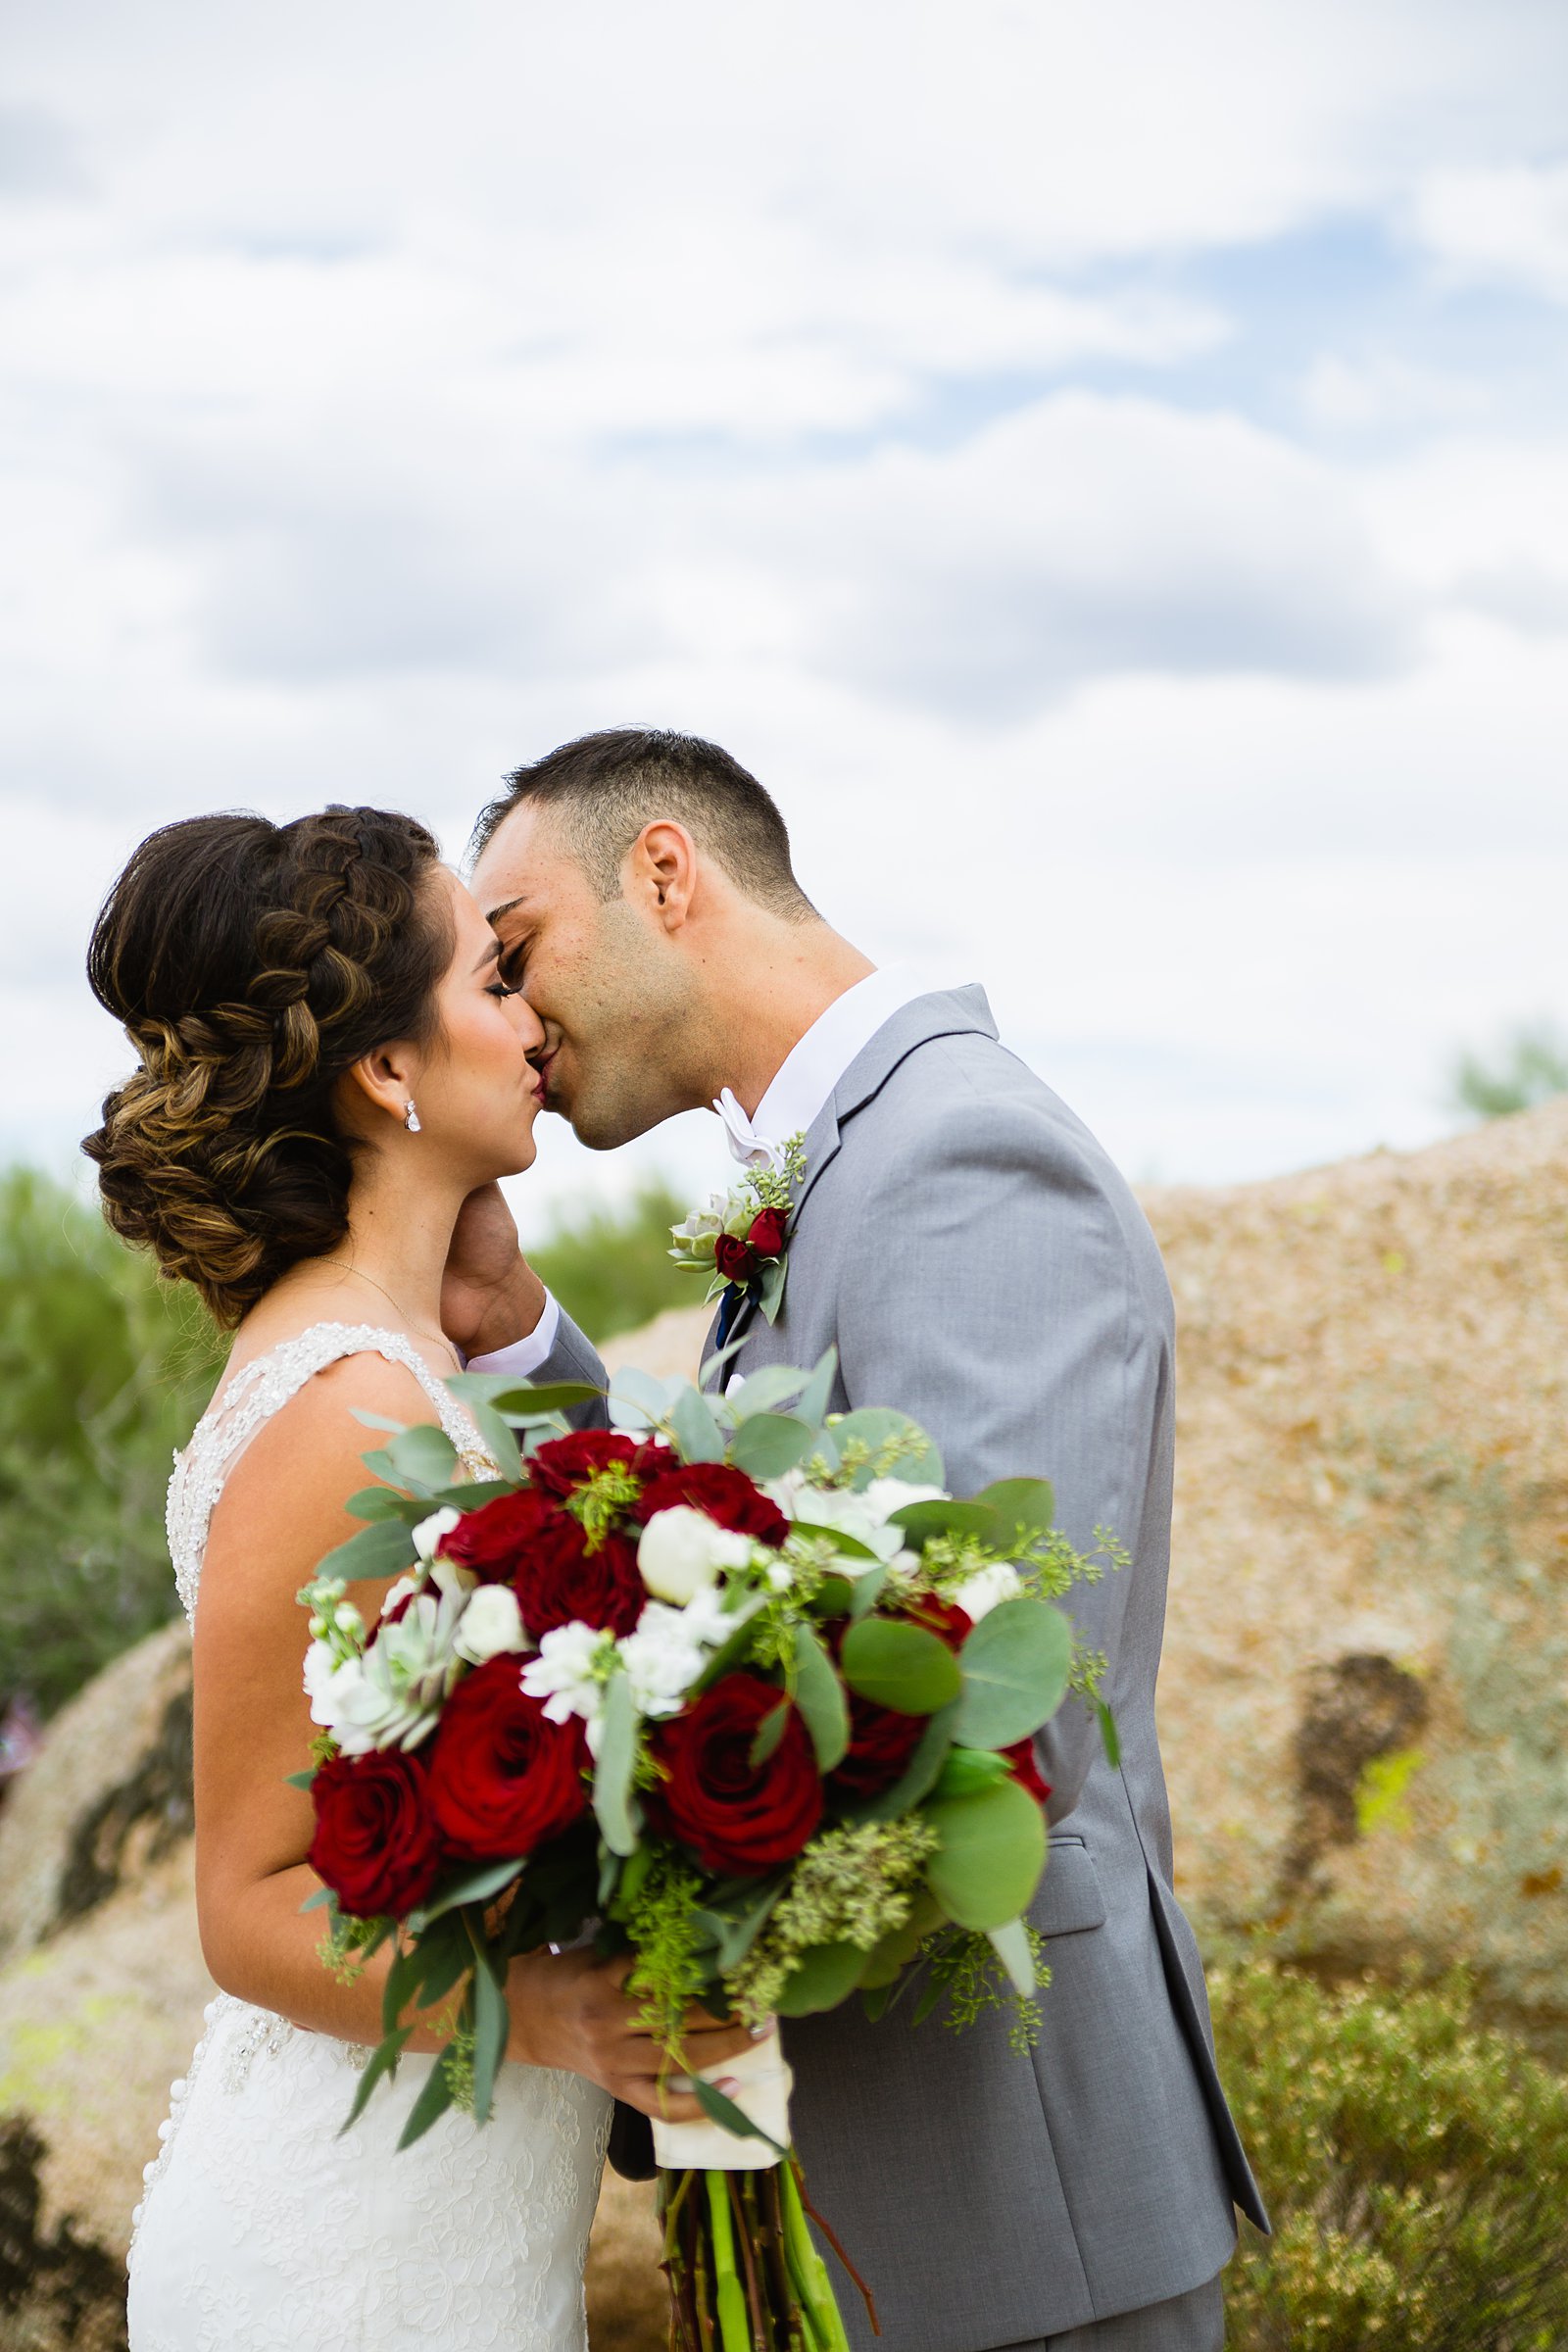 Bride and groom share an intimate moment during their first look at Troon North by Arizona wedding photographer PMA Photography.